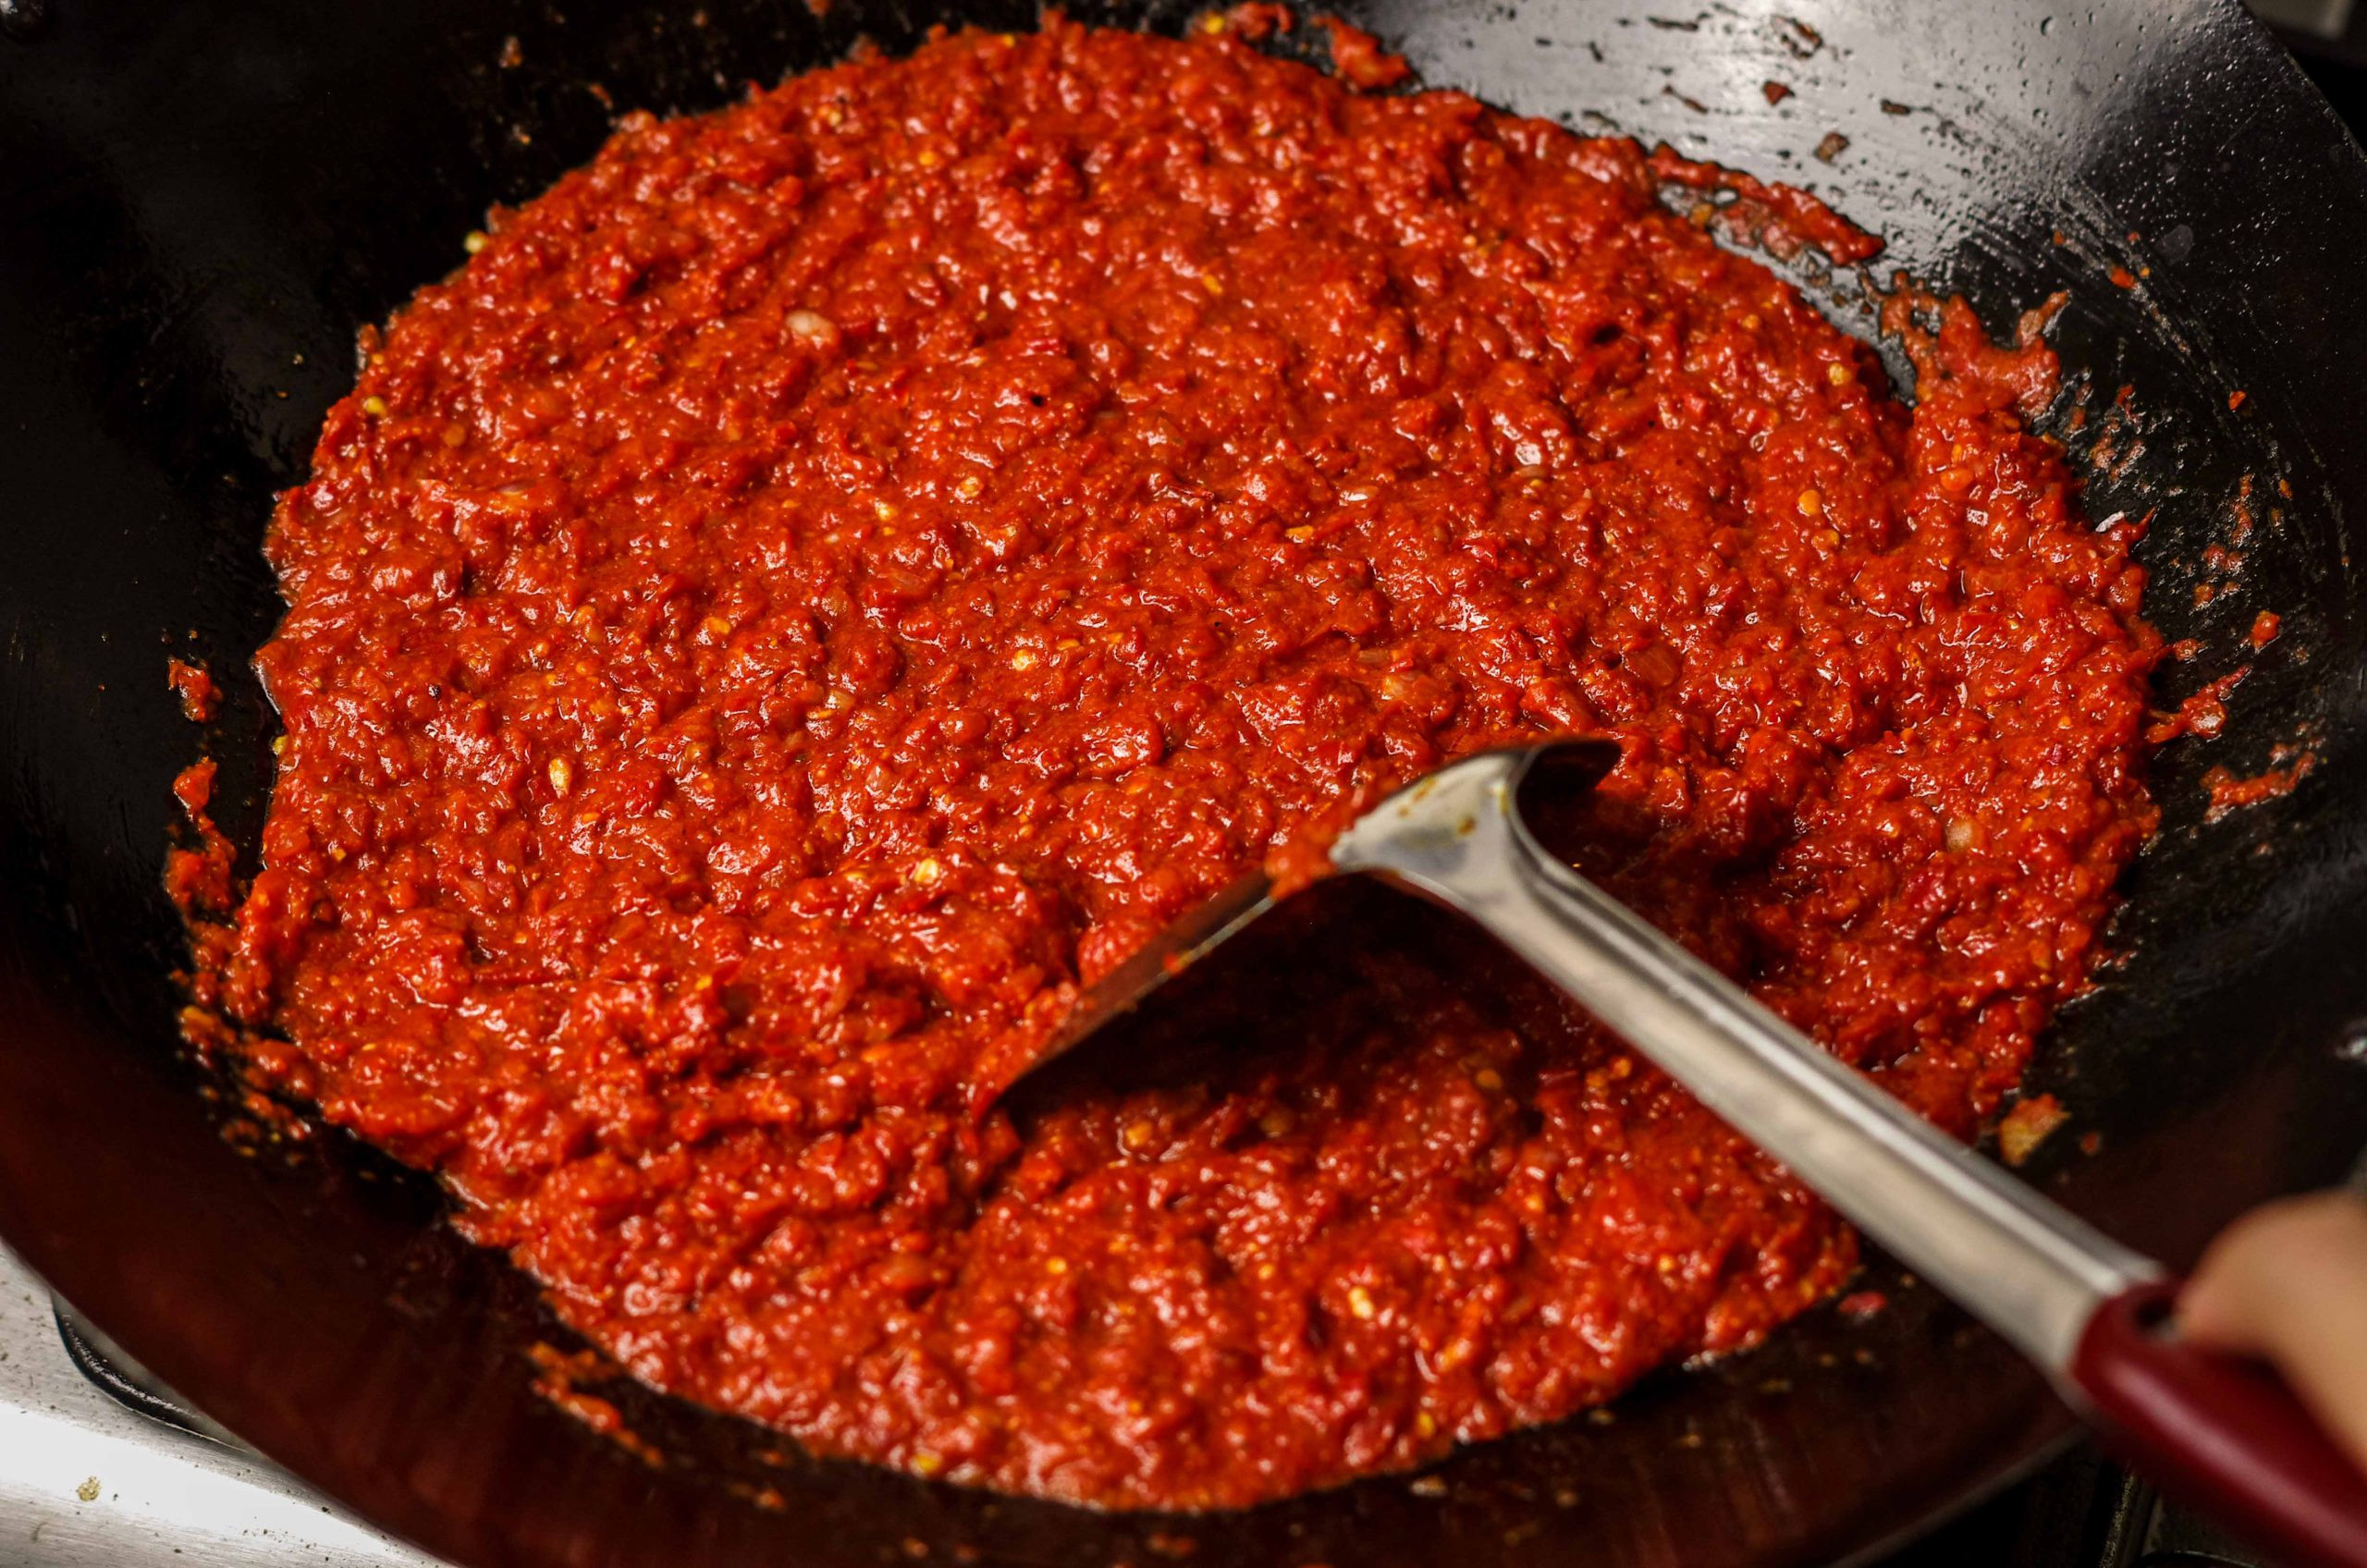 Bright red sambal being stirred with a metal spatula in a black wok.